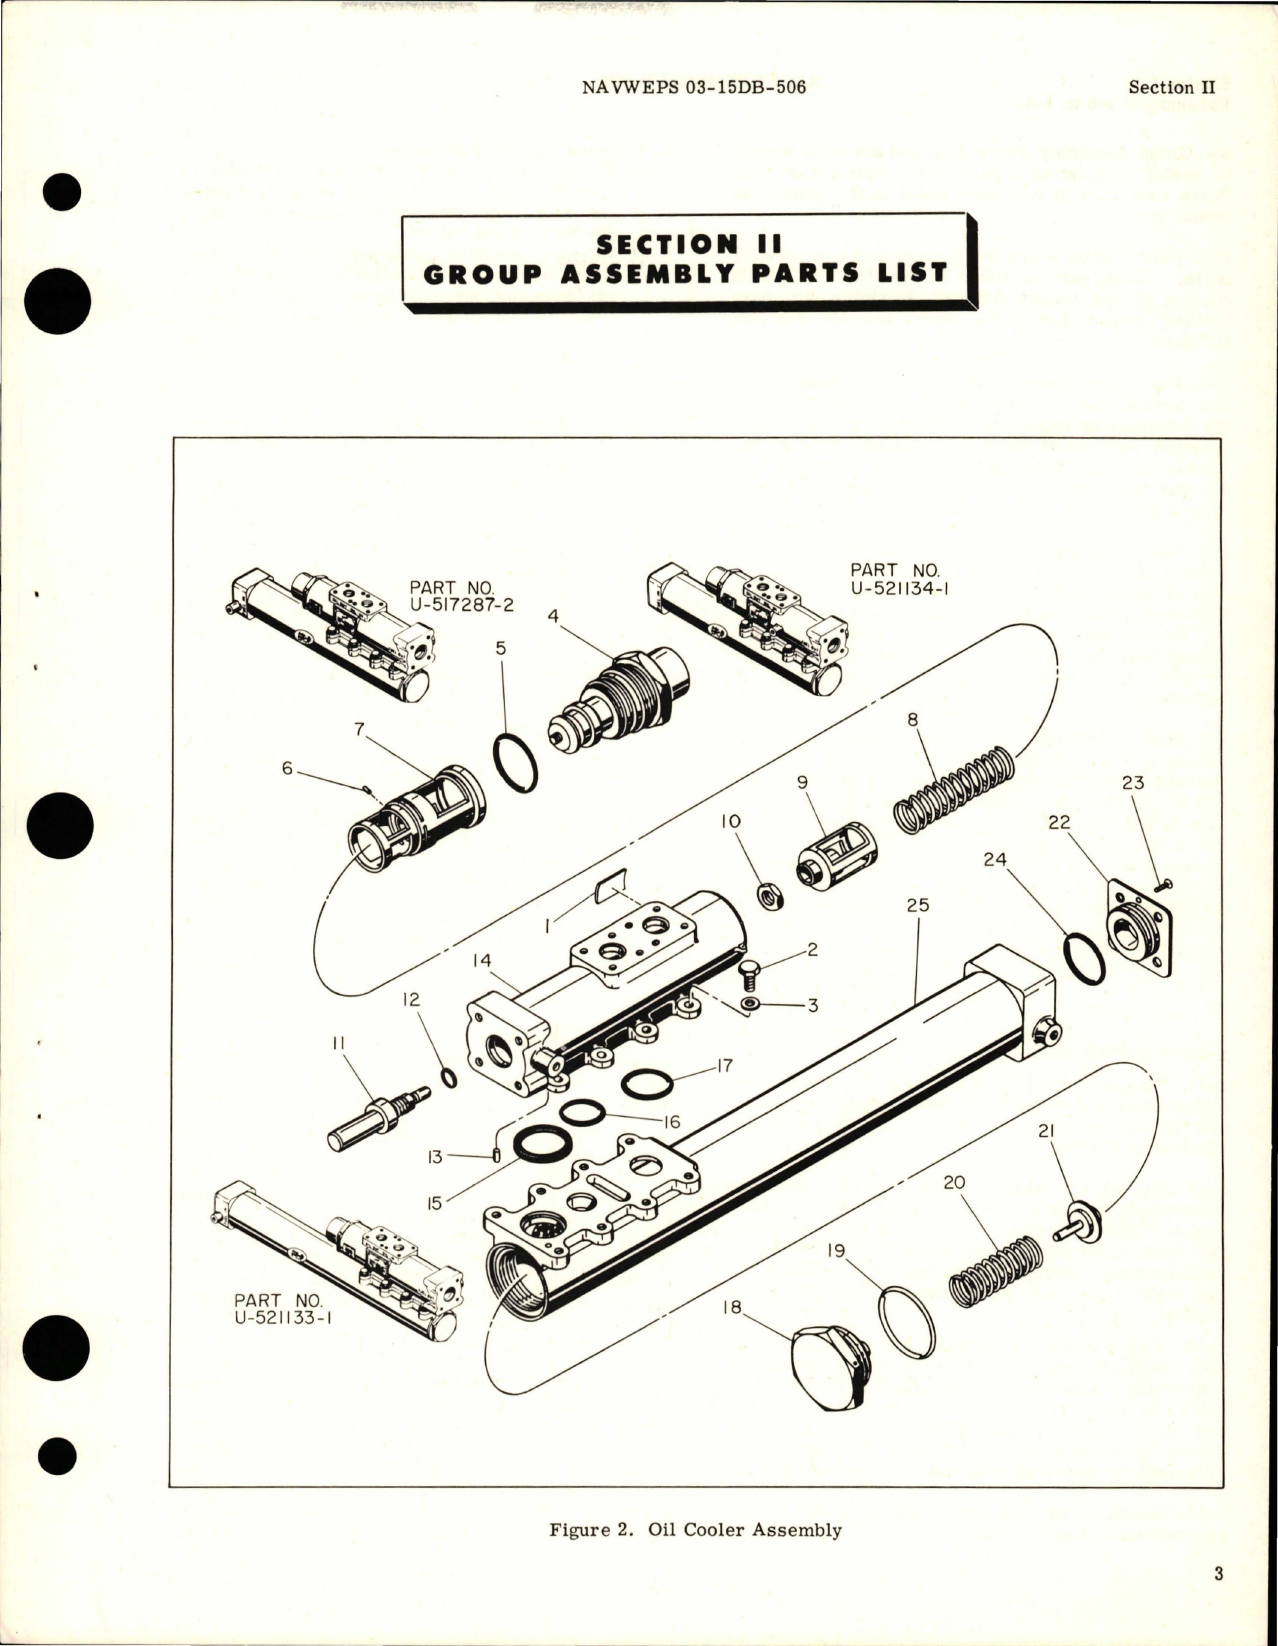 Sample page 5 from AirCorps Library document: Illustrated Parts Breakdown for Oil Cooler Assembly - Parts U-517286-2, U-517287-2, U-521133-1 and U-521134-1